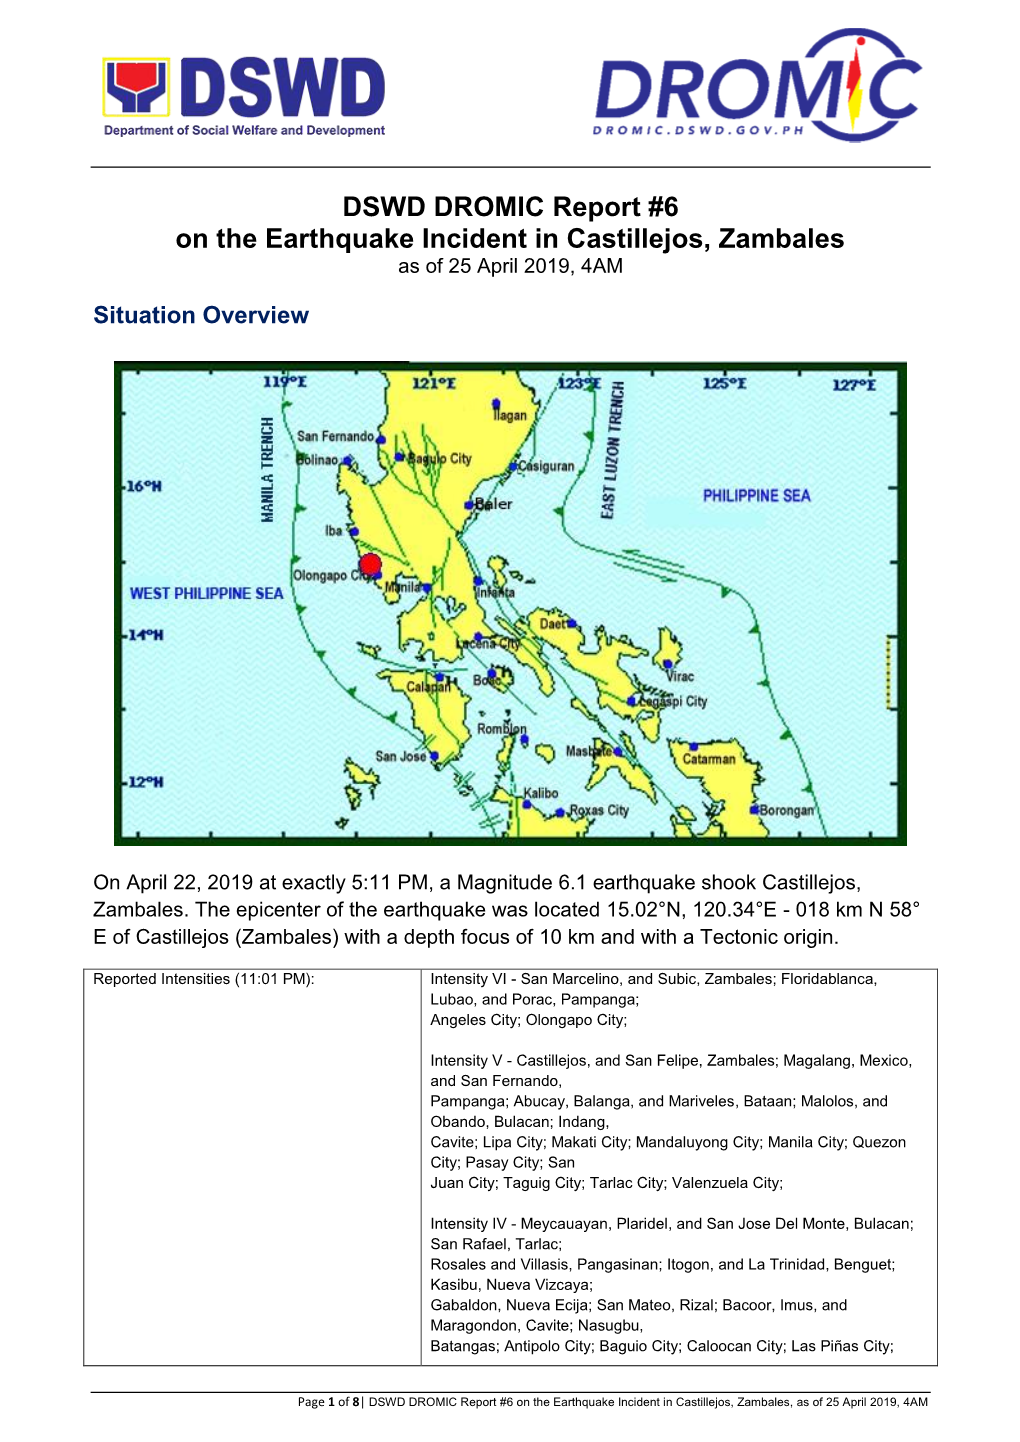 DSWD DROMIC Report #6 on the Earthquake Incident in Castillejos, Zambales As of 25 April 2019, 4AM